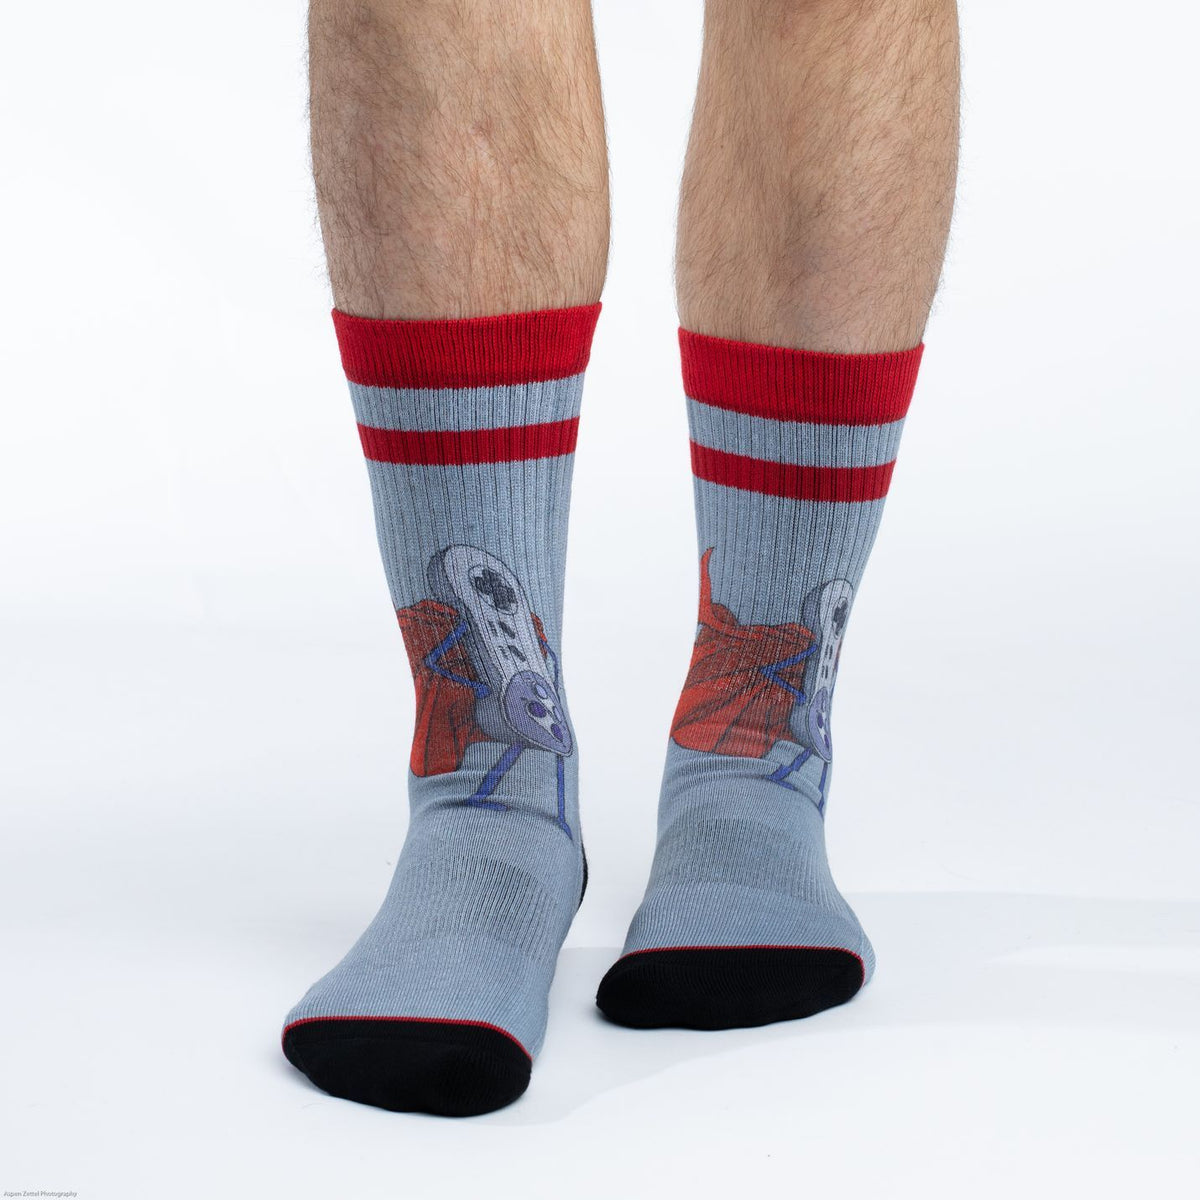 Good Luck Sock Super NES men&#39;s sock featuring NES controller with cape on gray sock worn by male model